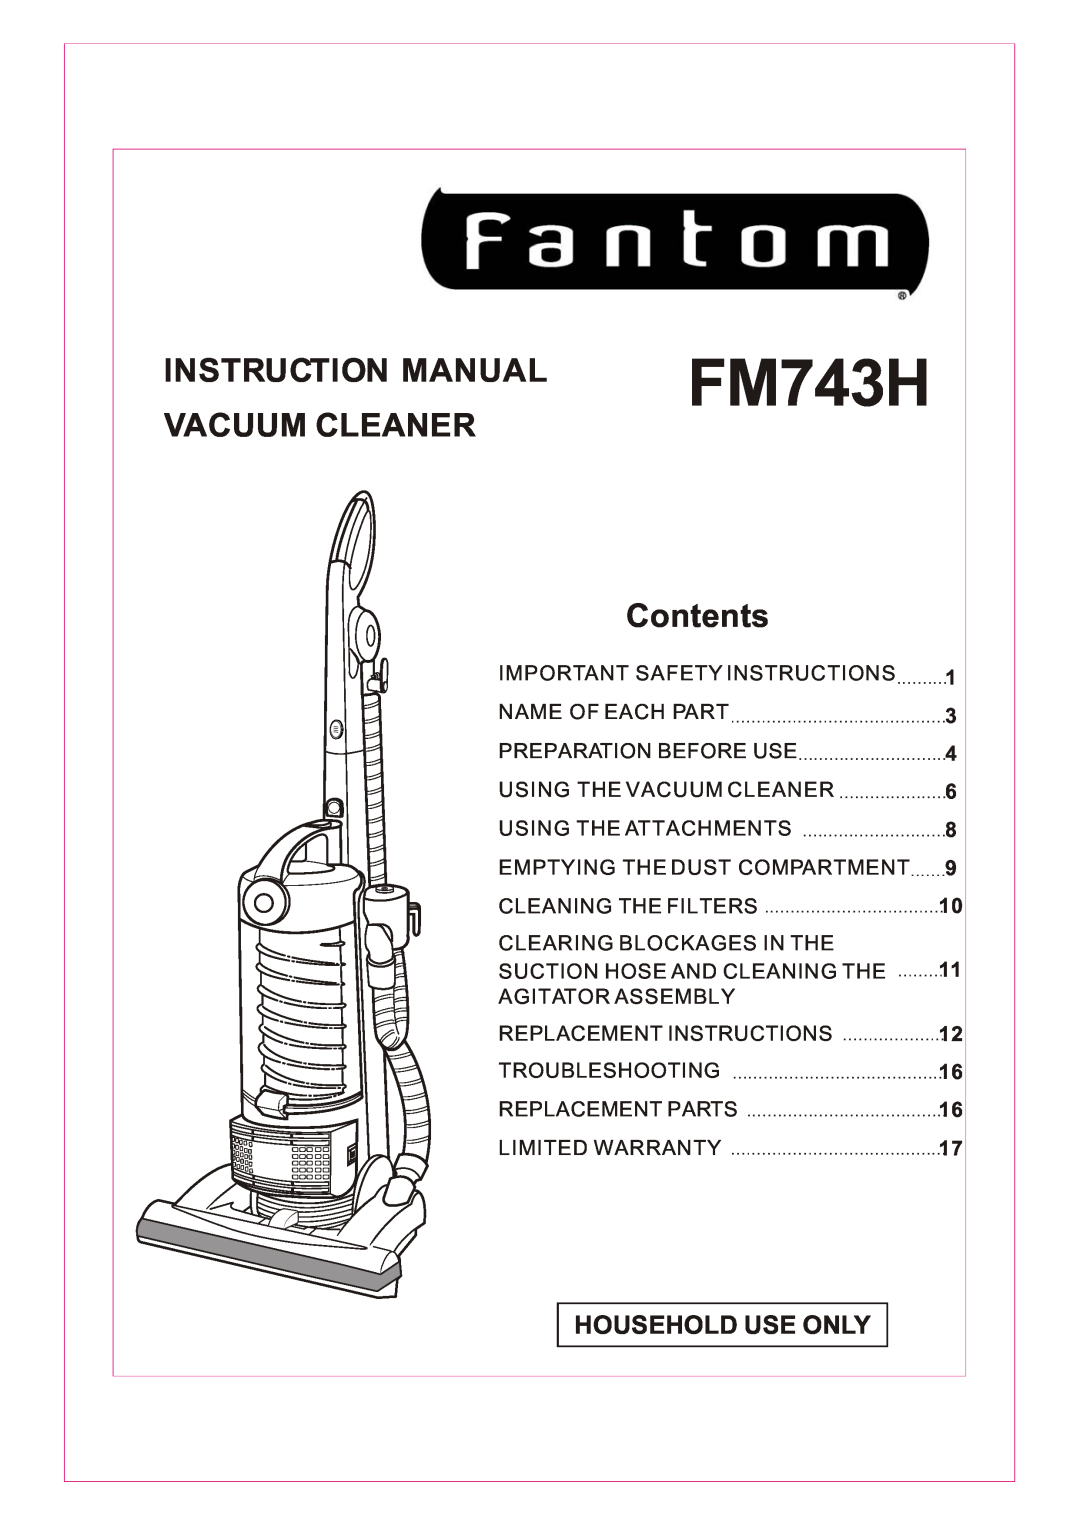 Fantom Vacuum FM743H instruction manual Vacuum Cleaner, Contents, Household Use Only, 1 3 4 6 8 